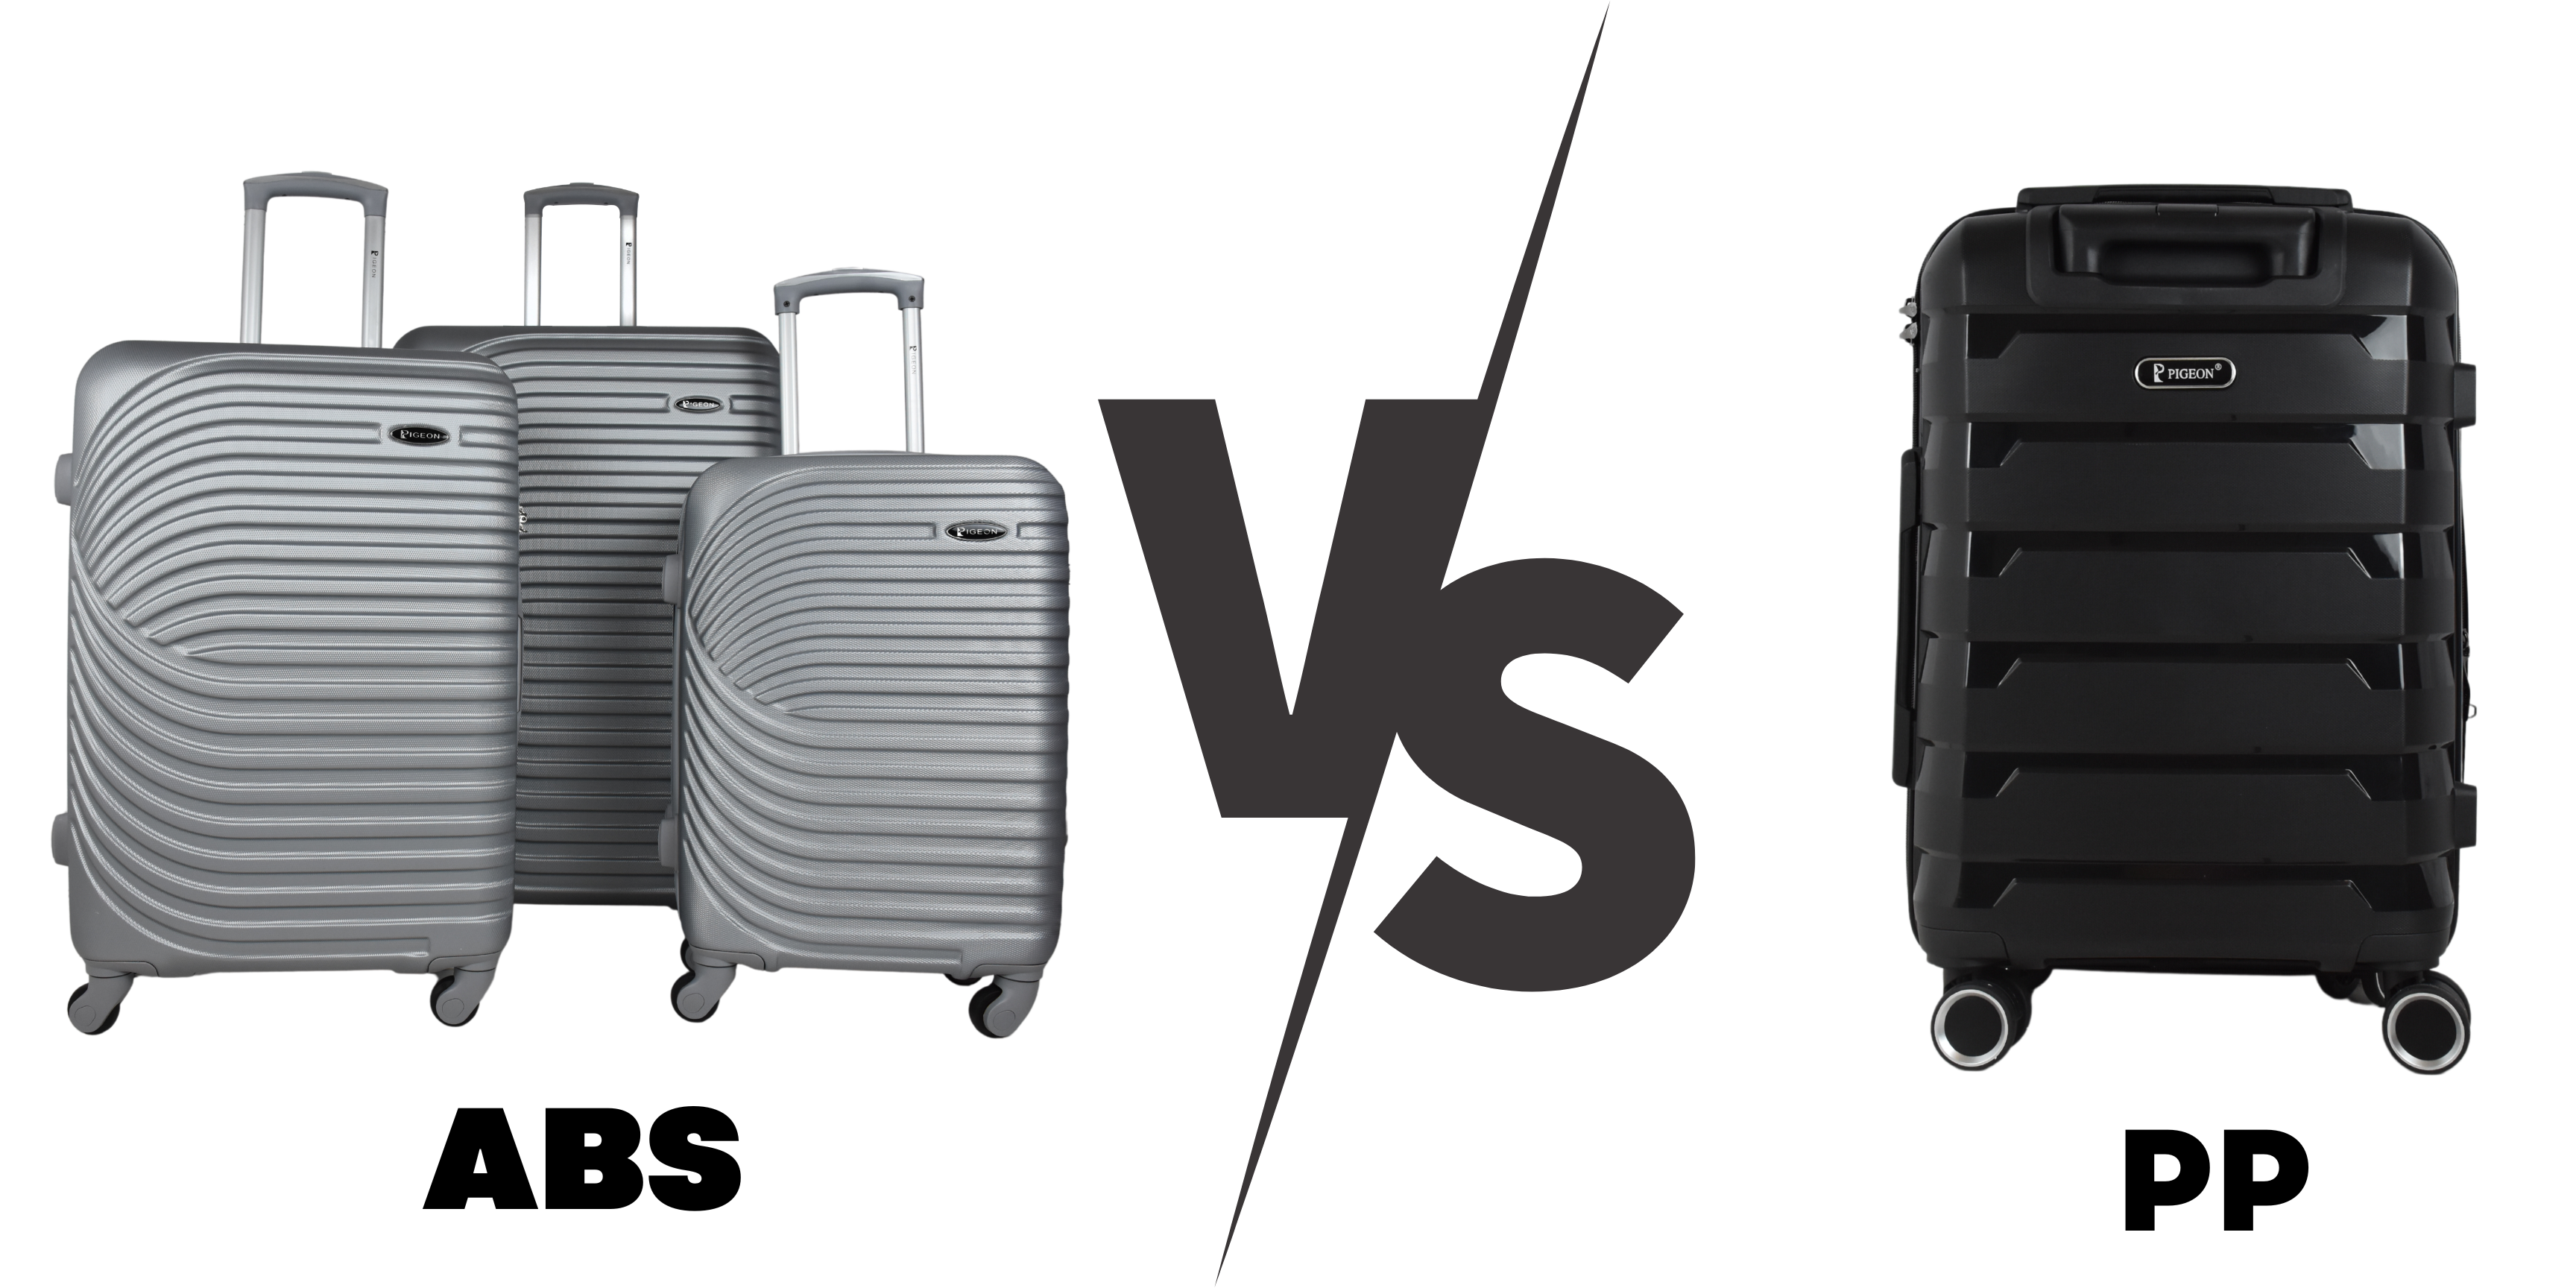 ABS VS PP (Polypropylene) Luggages Comparing